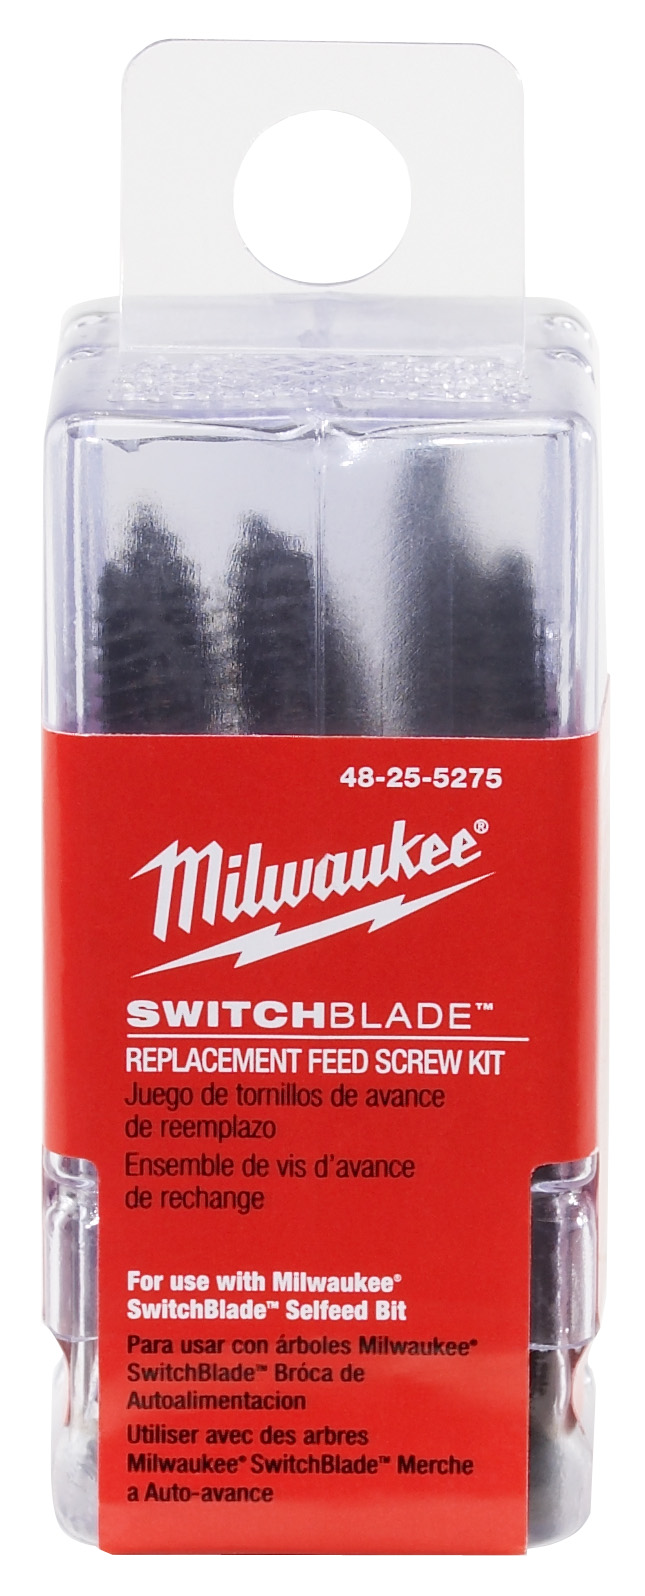 SwitchBlade Replacement Feed Screw Kit